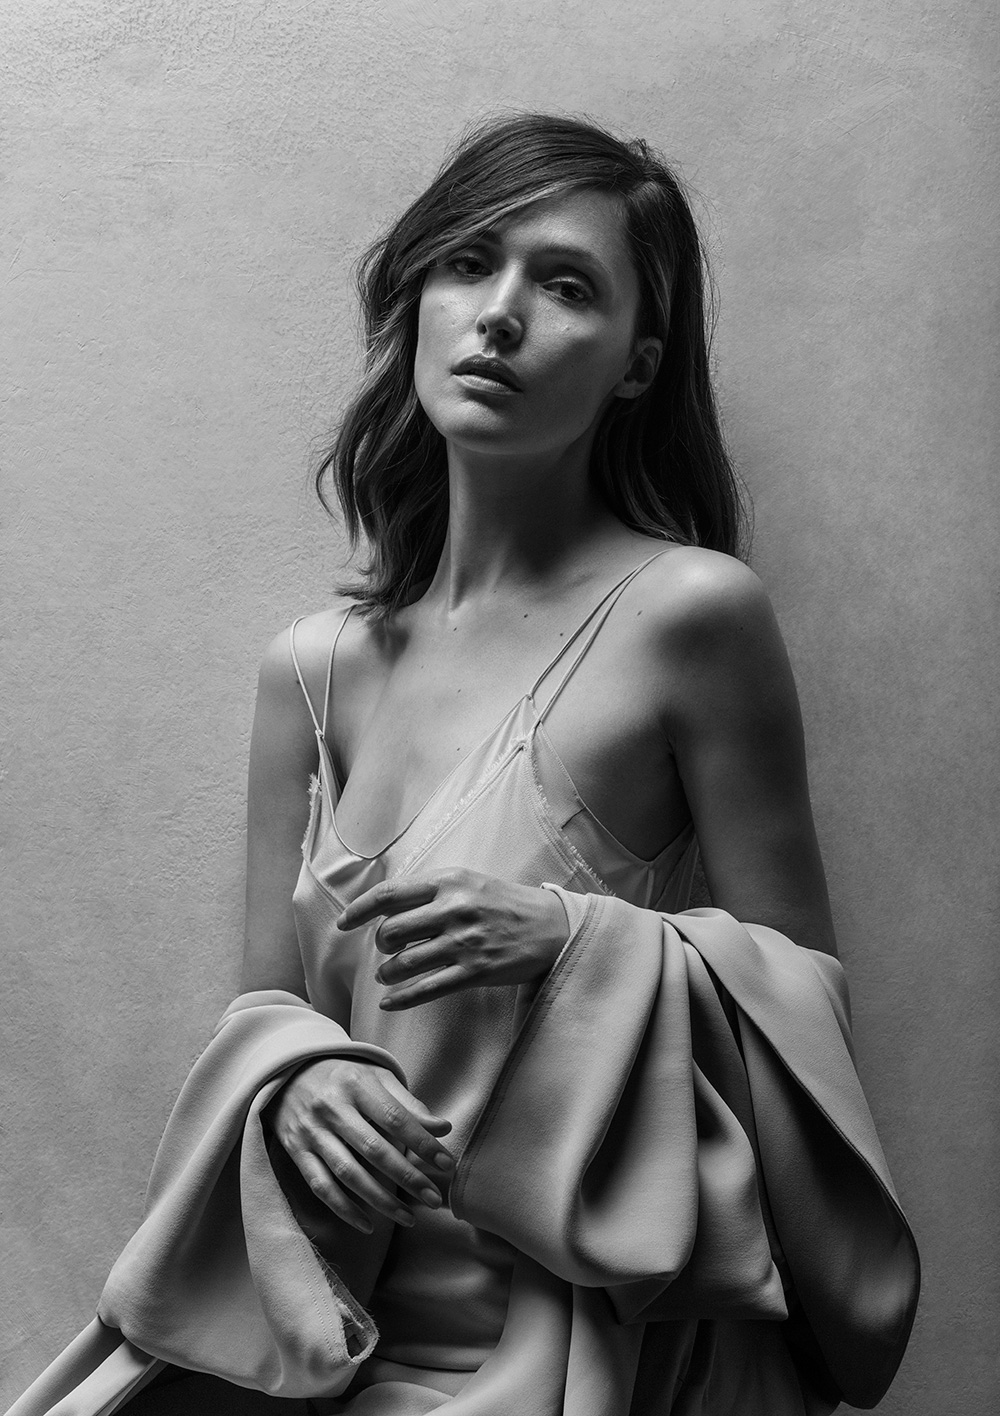 Image of Rose Byrne, black and white photo by Stefani Pappas.